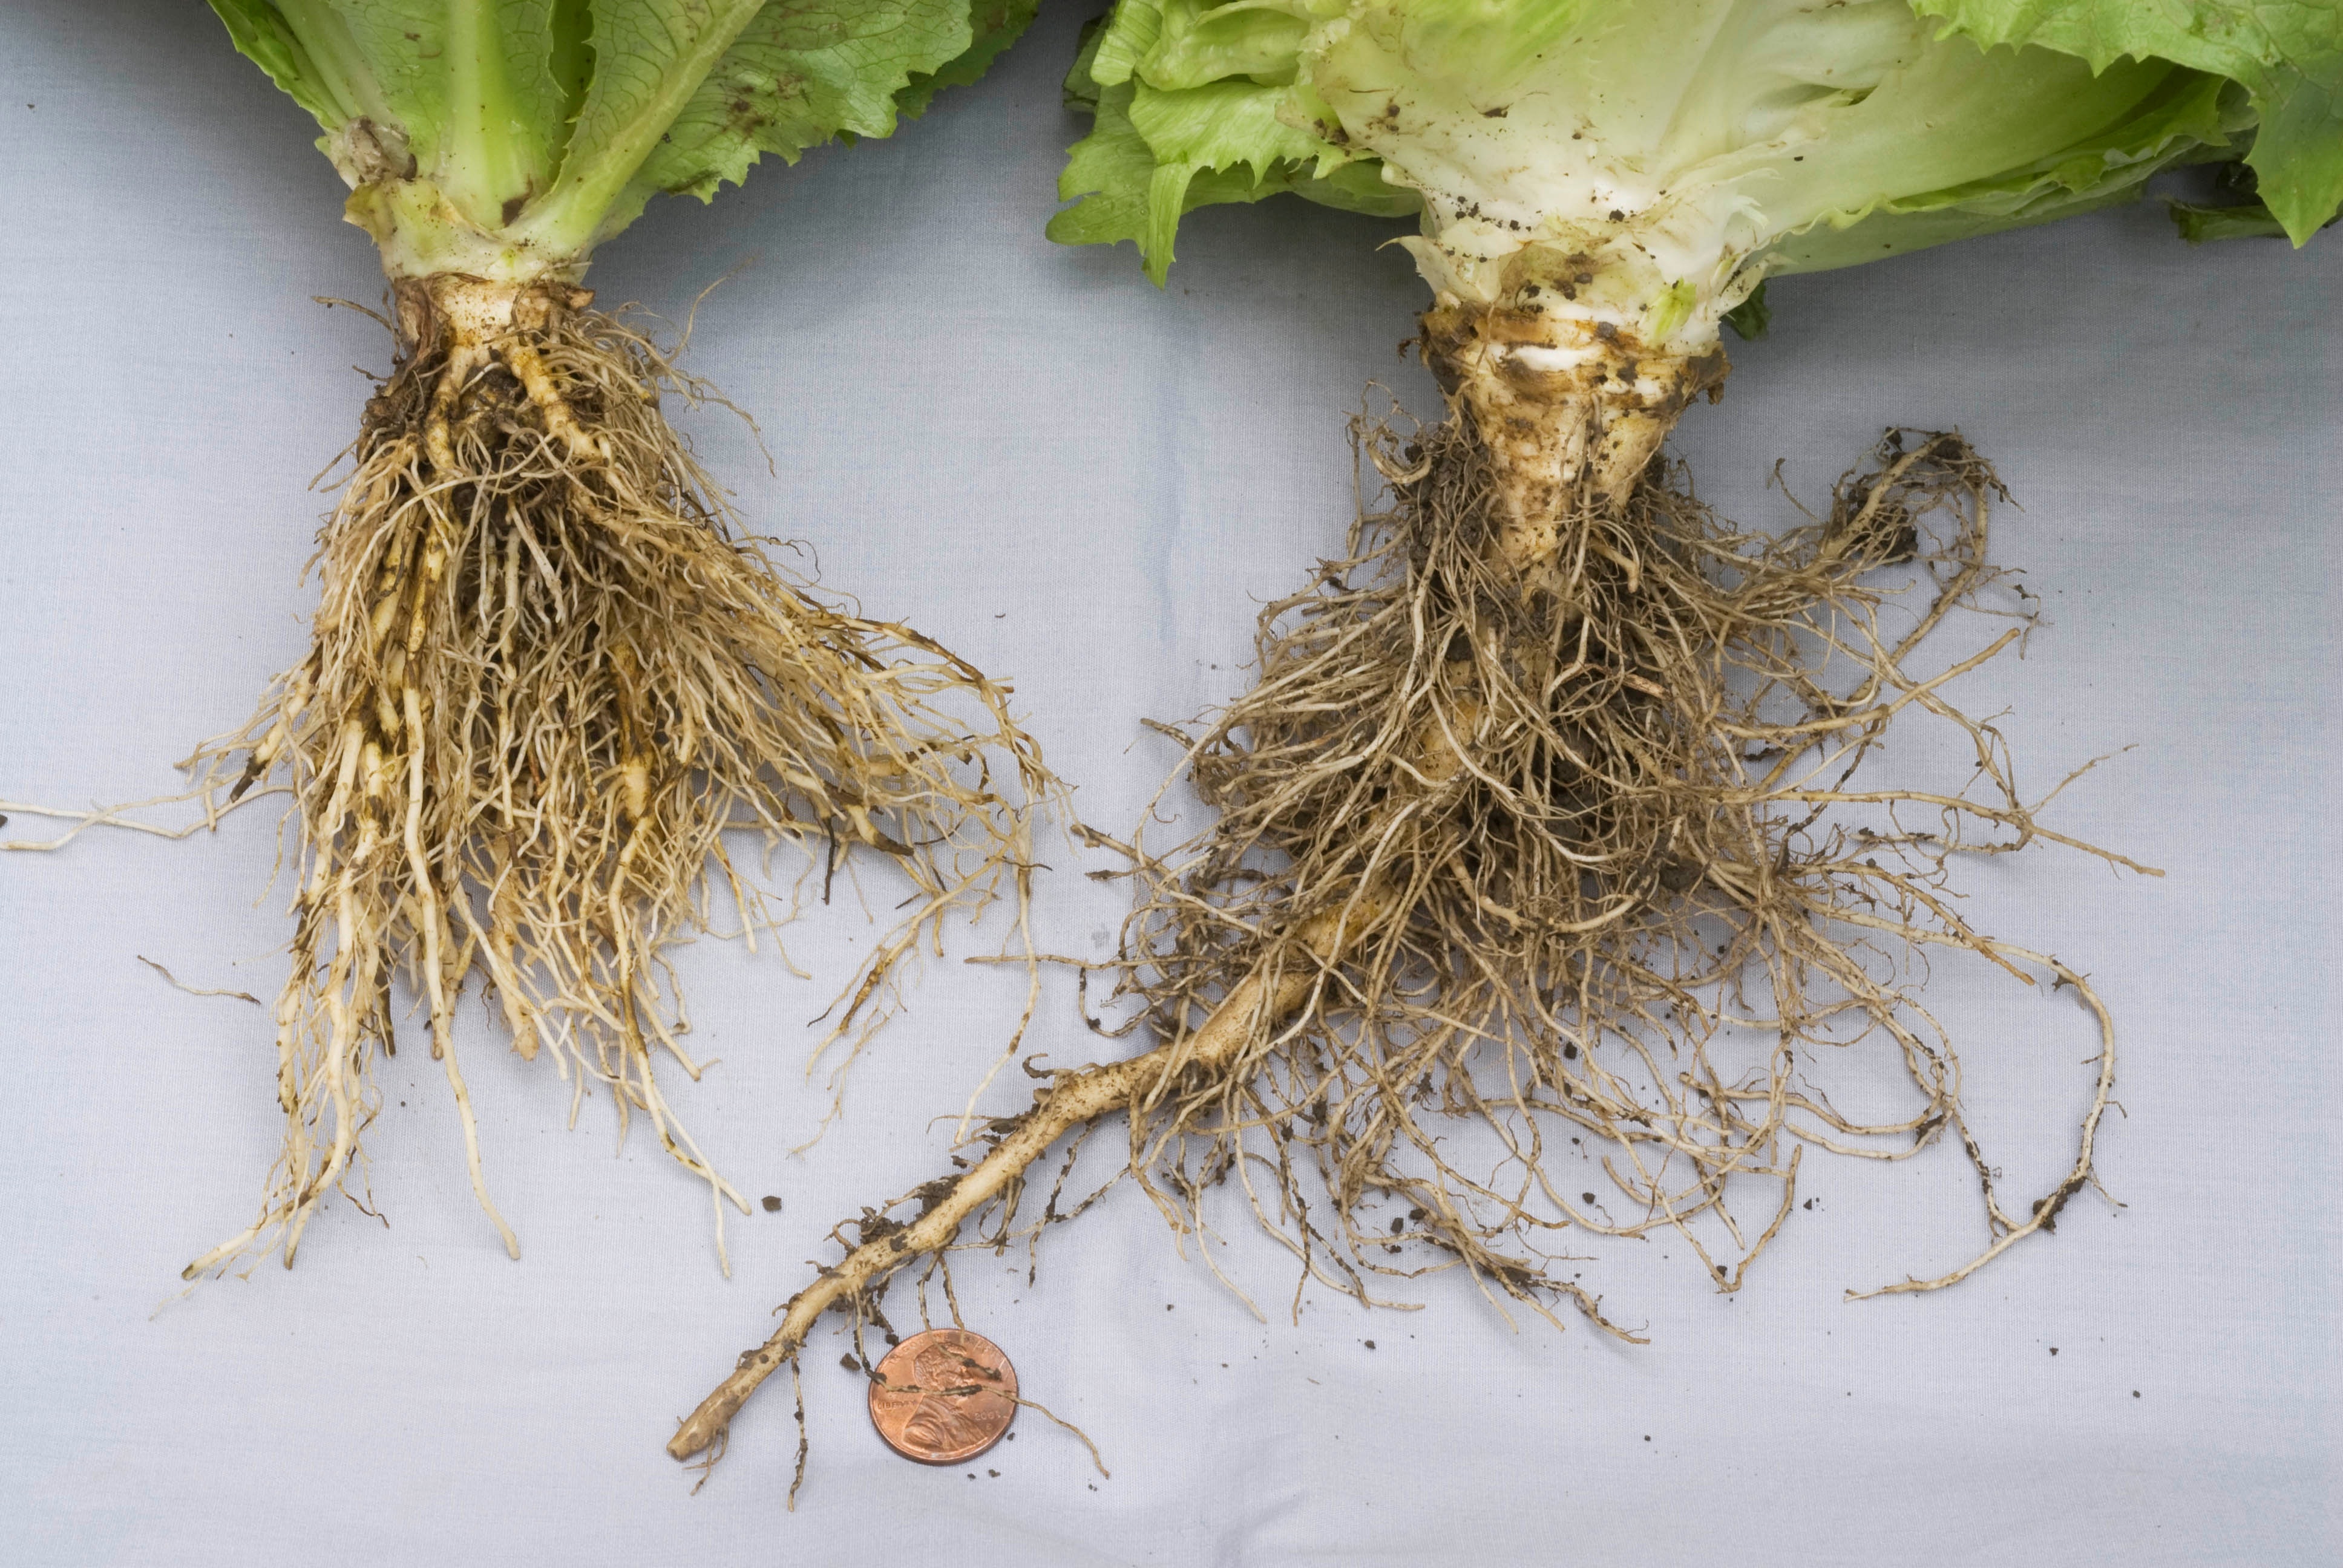 Occurrence of black root rot of Lettuce - Salinas Valley 